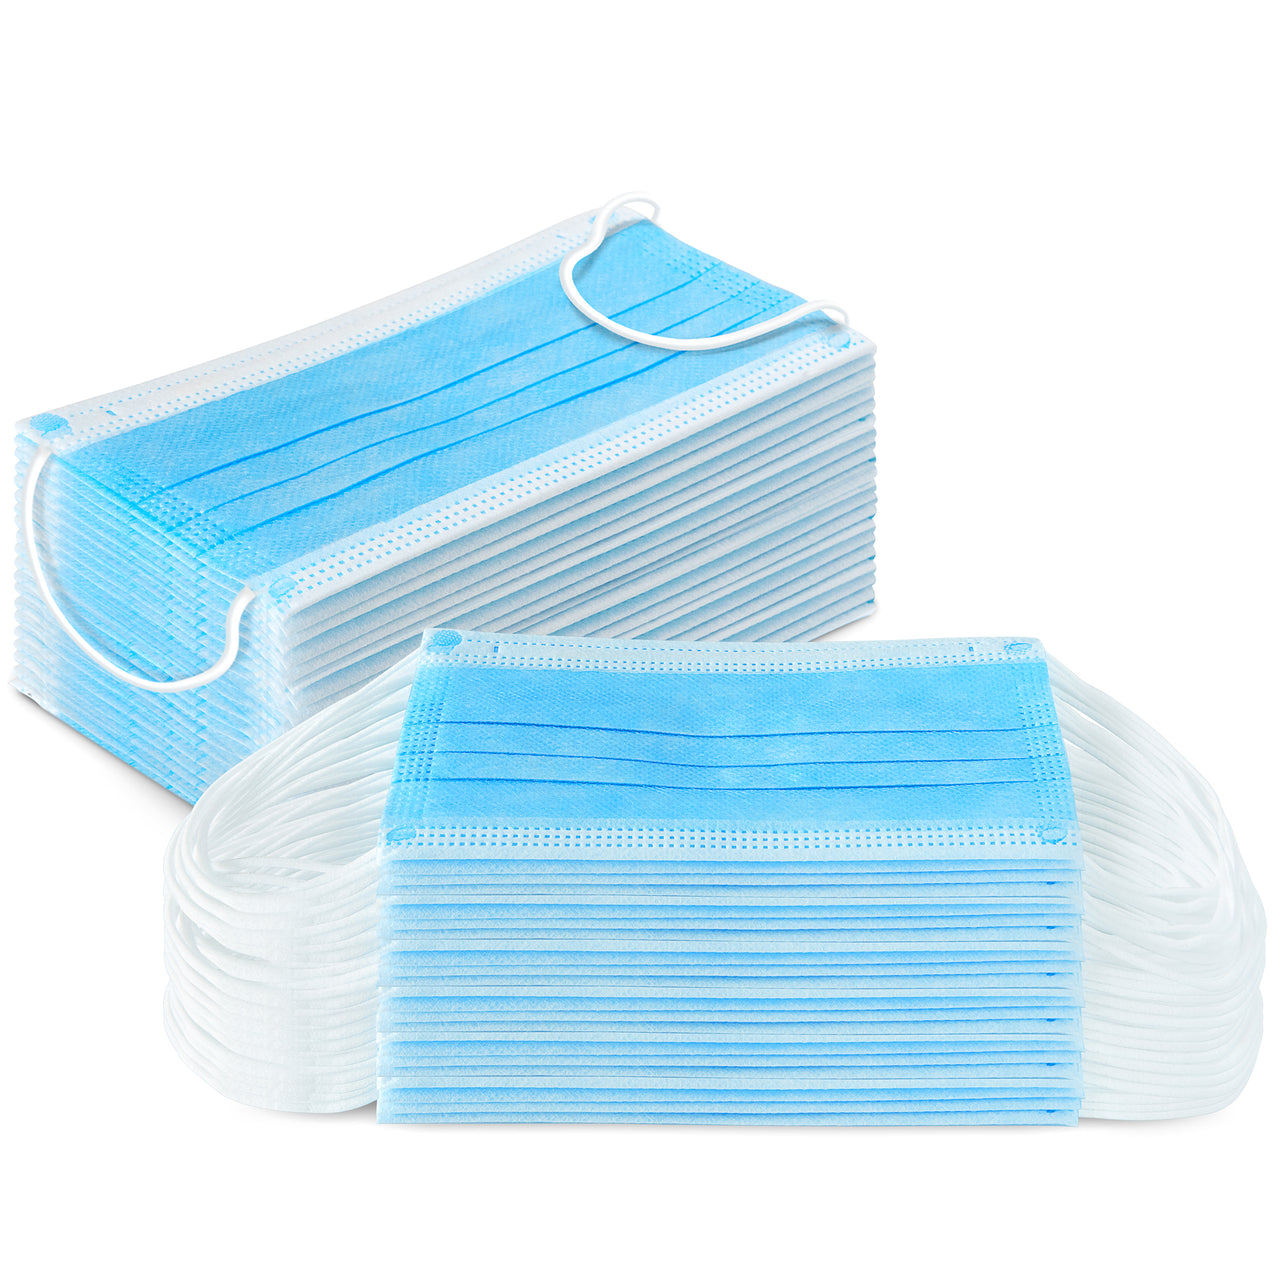 Bitybean Disposable Face Masks Disposable - 2,000 PCS - for Home & Office - Breathable & Comfortable Filter, Blue